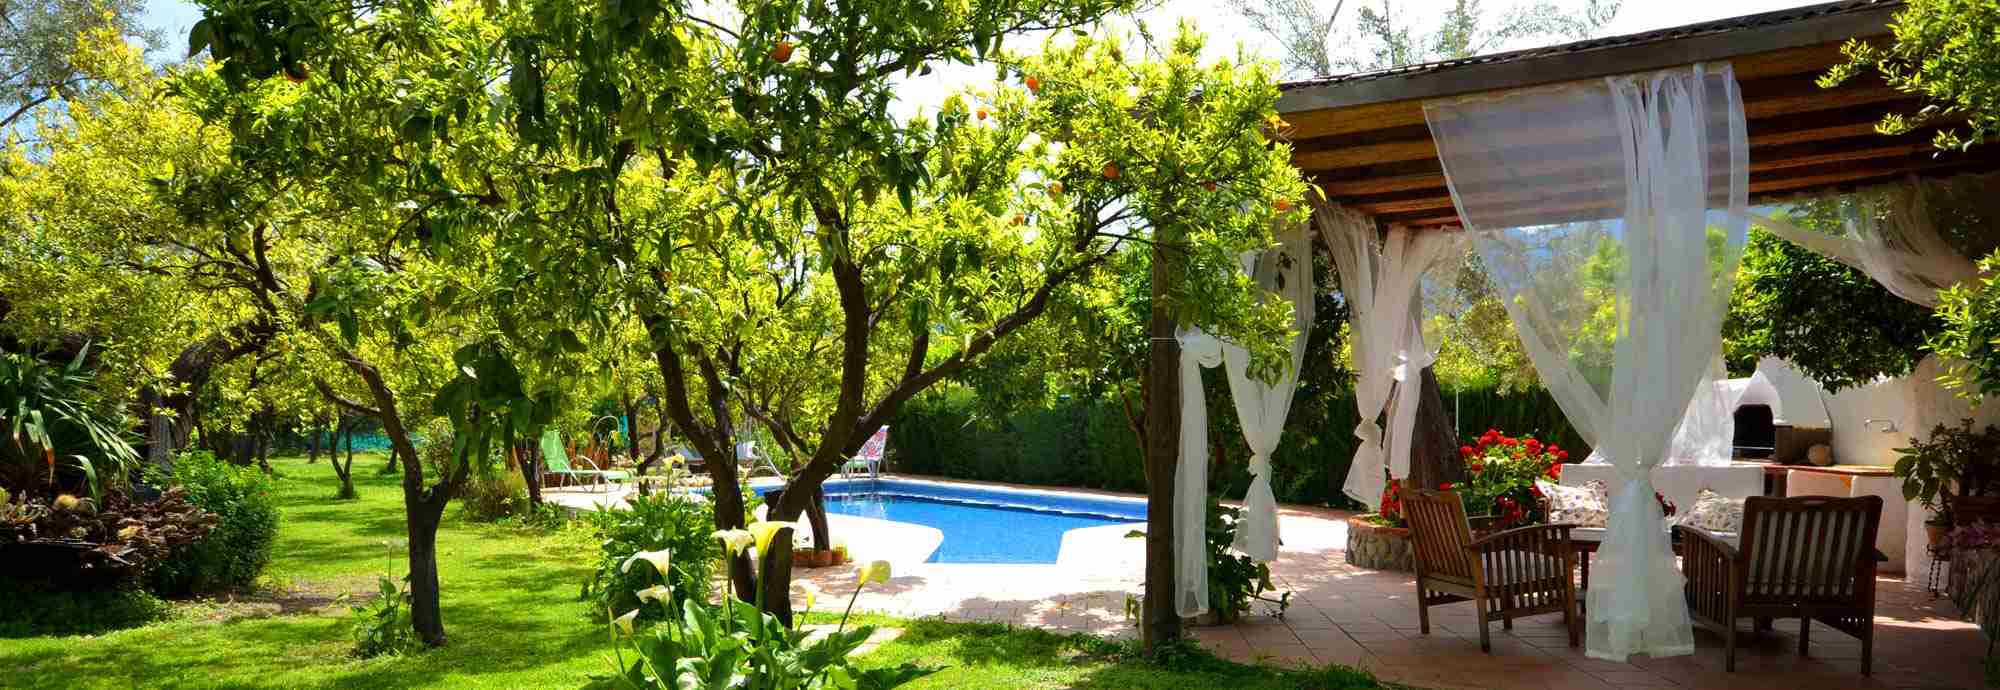 2 bedroom villa with private pool & gardens in Andalucia, Spain 